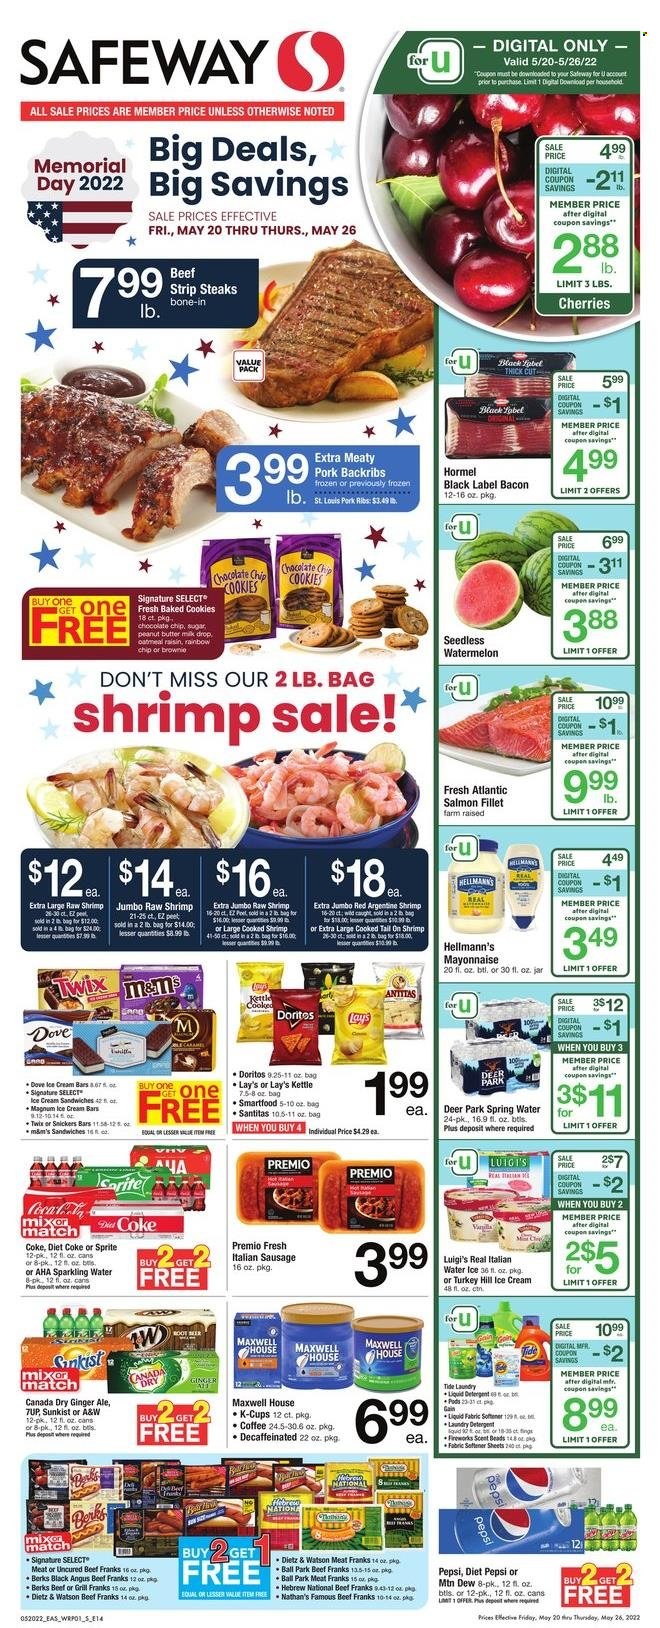 thumbnail - Safeway Flyer - 05/27/2022 - 06/02/2022 - Sales products - brownies, watermelon, cherries, beef meat, steak, striploin steak, pork meat, pork ribs, salmon, salmon fillet, shrimps, Hormel, bacon, Dietz & Watson, sausage, italian sausage, milk, mayonnaise, Hellmann’s, ice cream, ice cream bars, ice cream sandwich, cookies, Snickers, Twix, M&M's, Doritos, Lay’s, Smartfood, oatmeal, peanut butter, Canada Dry, Coca-Cola, ginger ale, Mountain Dew, Sprite, Pepsi, Diet Pepsi, Diet Coke, 7UP, A&W, spring water, sparkling water, Maxwell House, coffee, coffee capsules, K-Cups, detergent, Gain, Tide, fabric softener, liquid detergent, laundry detergent, Dove, grill. Page 1.